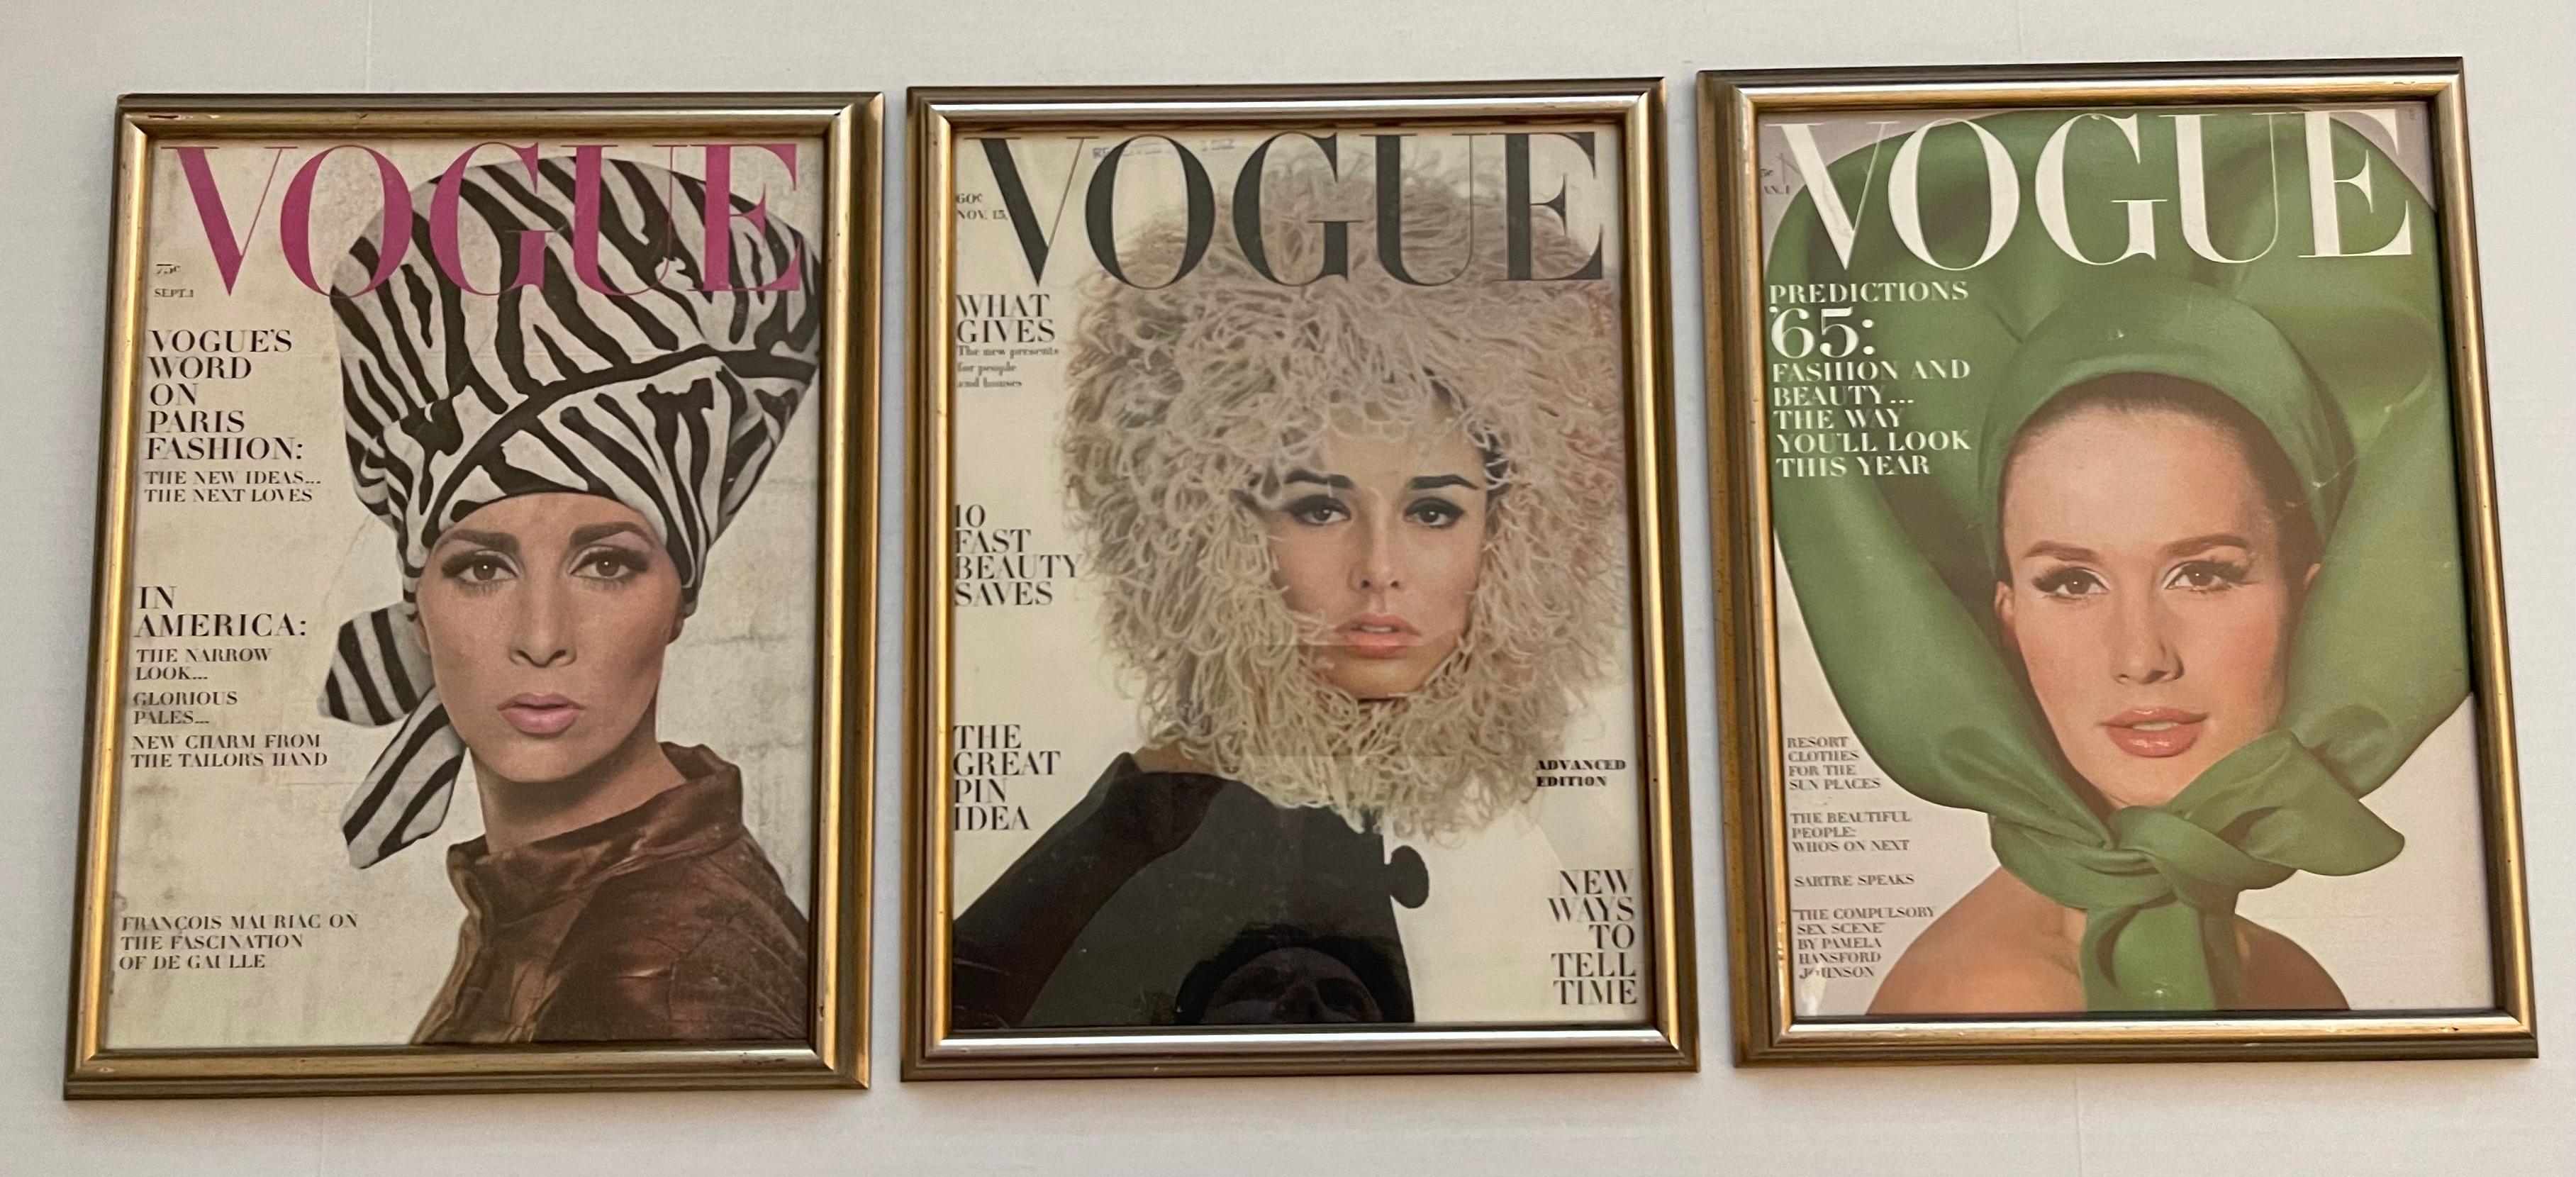 Set of three framed 1960s Vogue Magazine covers. Left to right: 
September 1964 cover features model Wilhelmina photographed by David Bailey.
November 15, 1962 cover features model Sondra Peterson photographed by Irving Penn. 
January 1965 cover